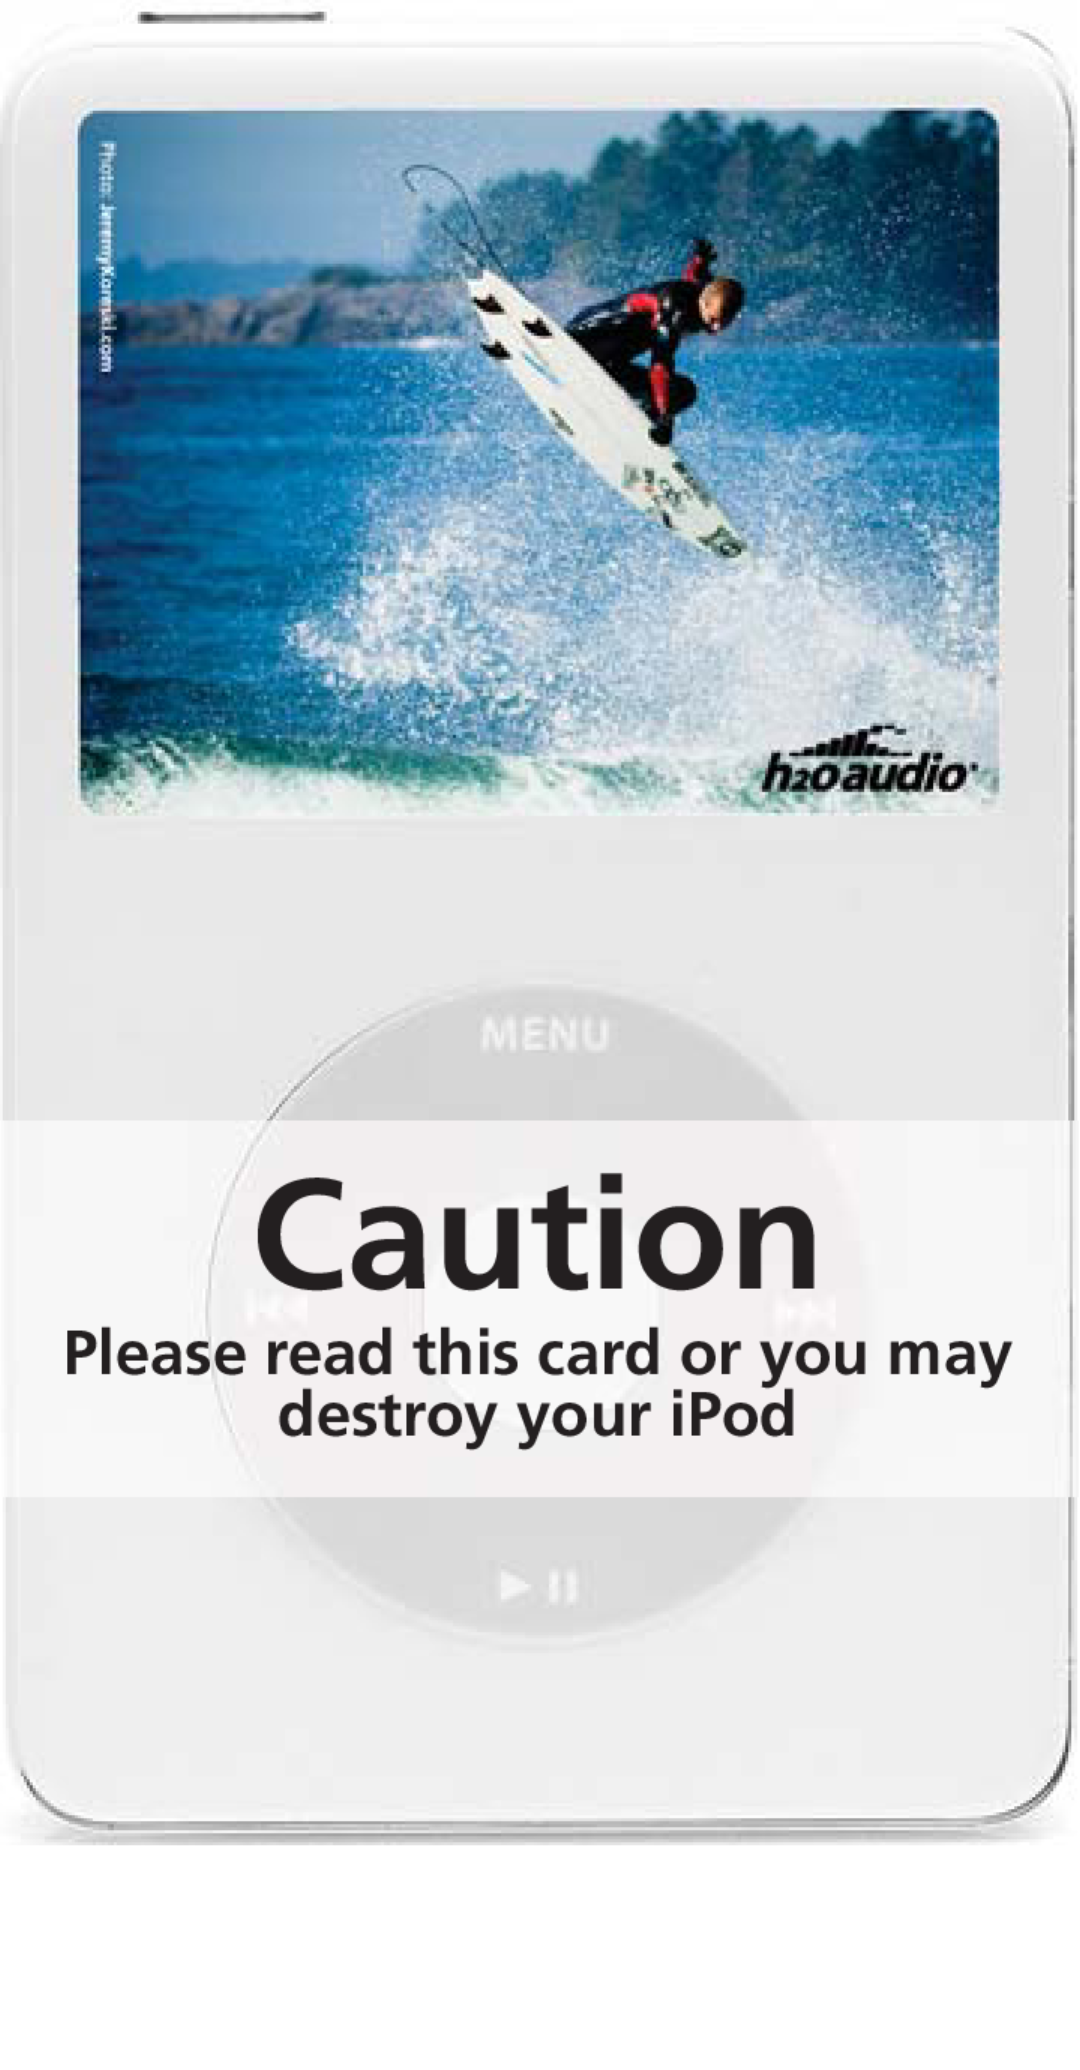 H2O Audio S5 warranty Please read this card or you may, destroy your iPod 